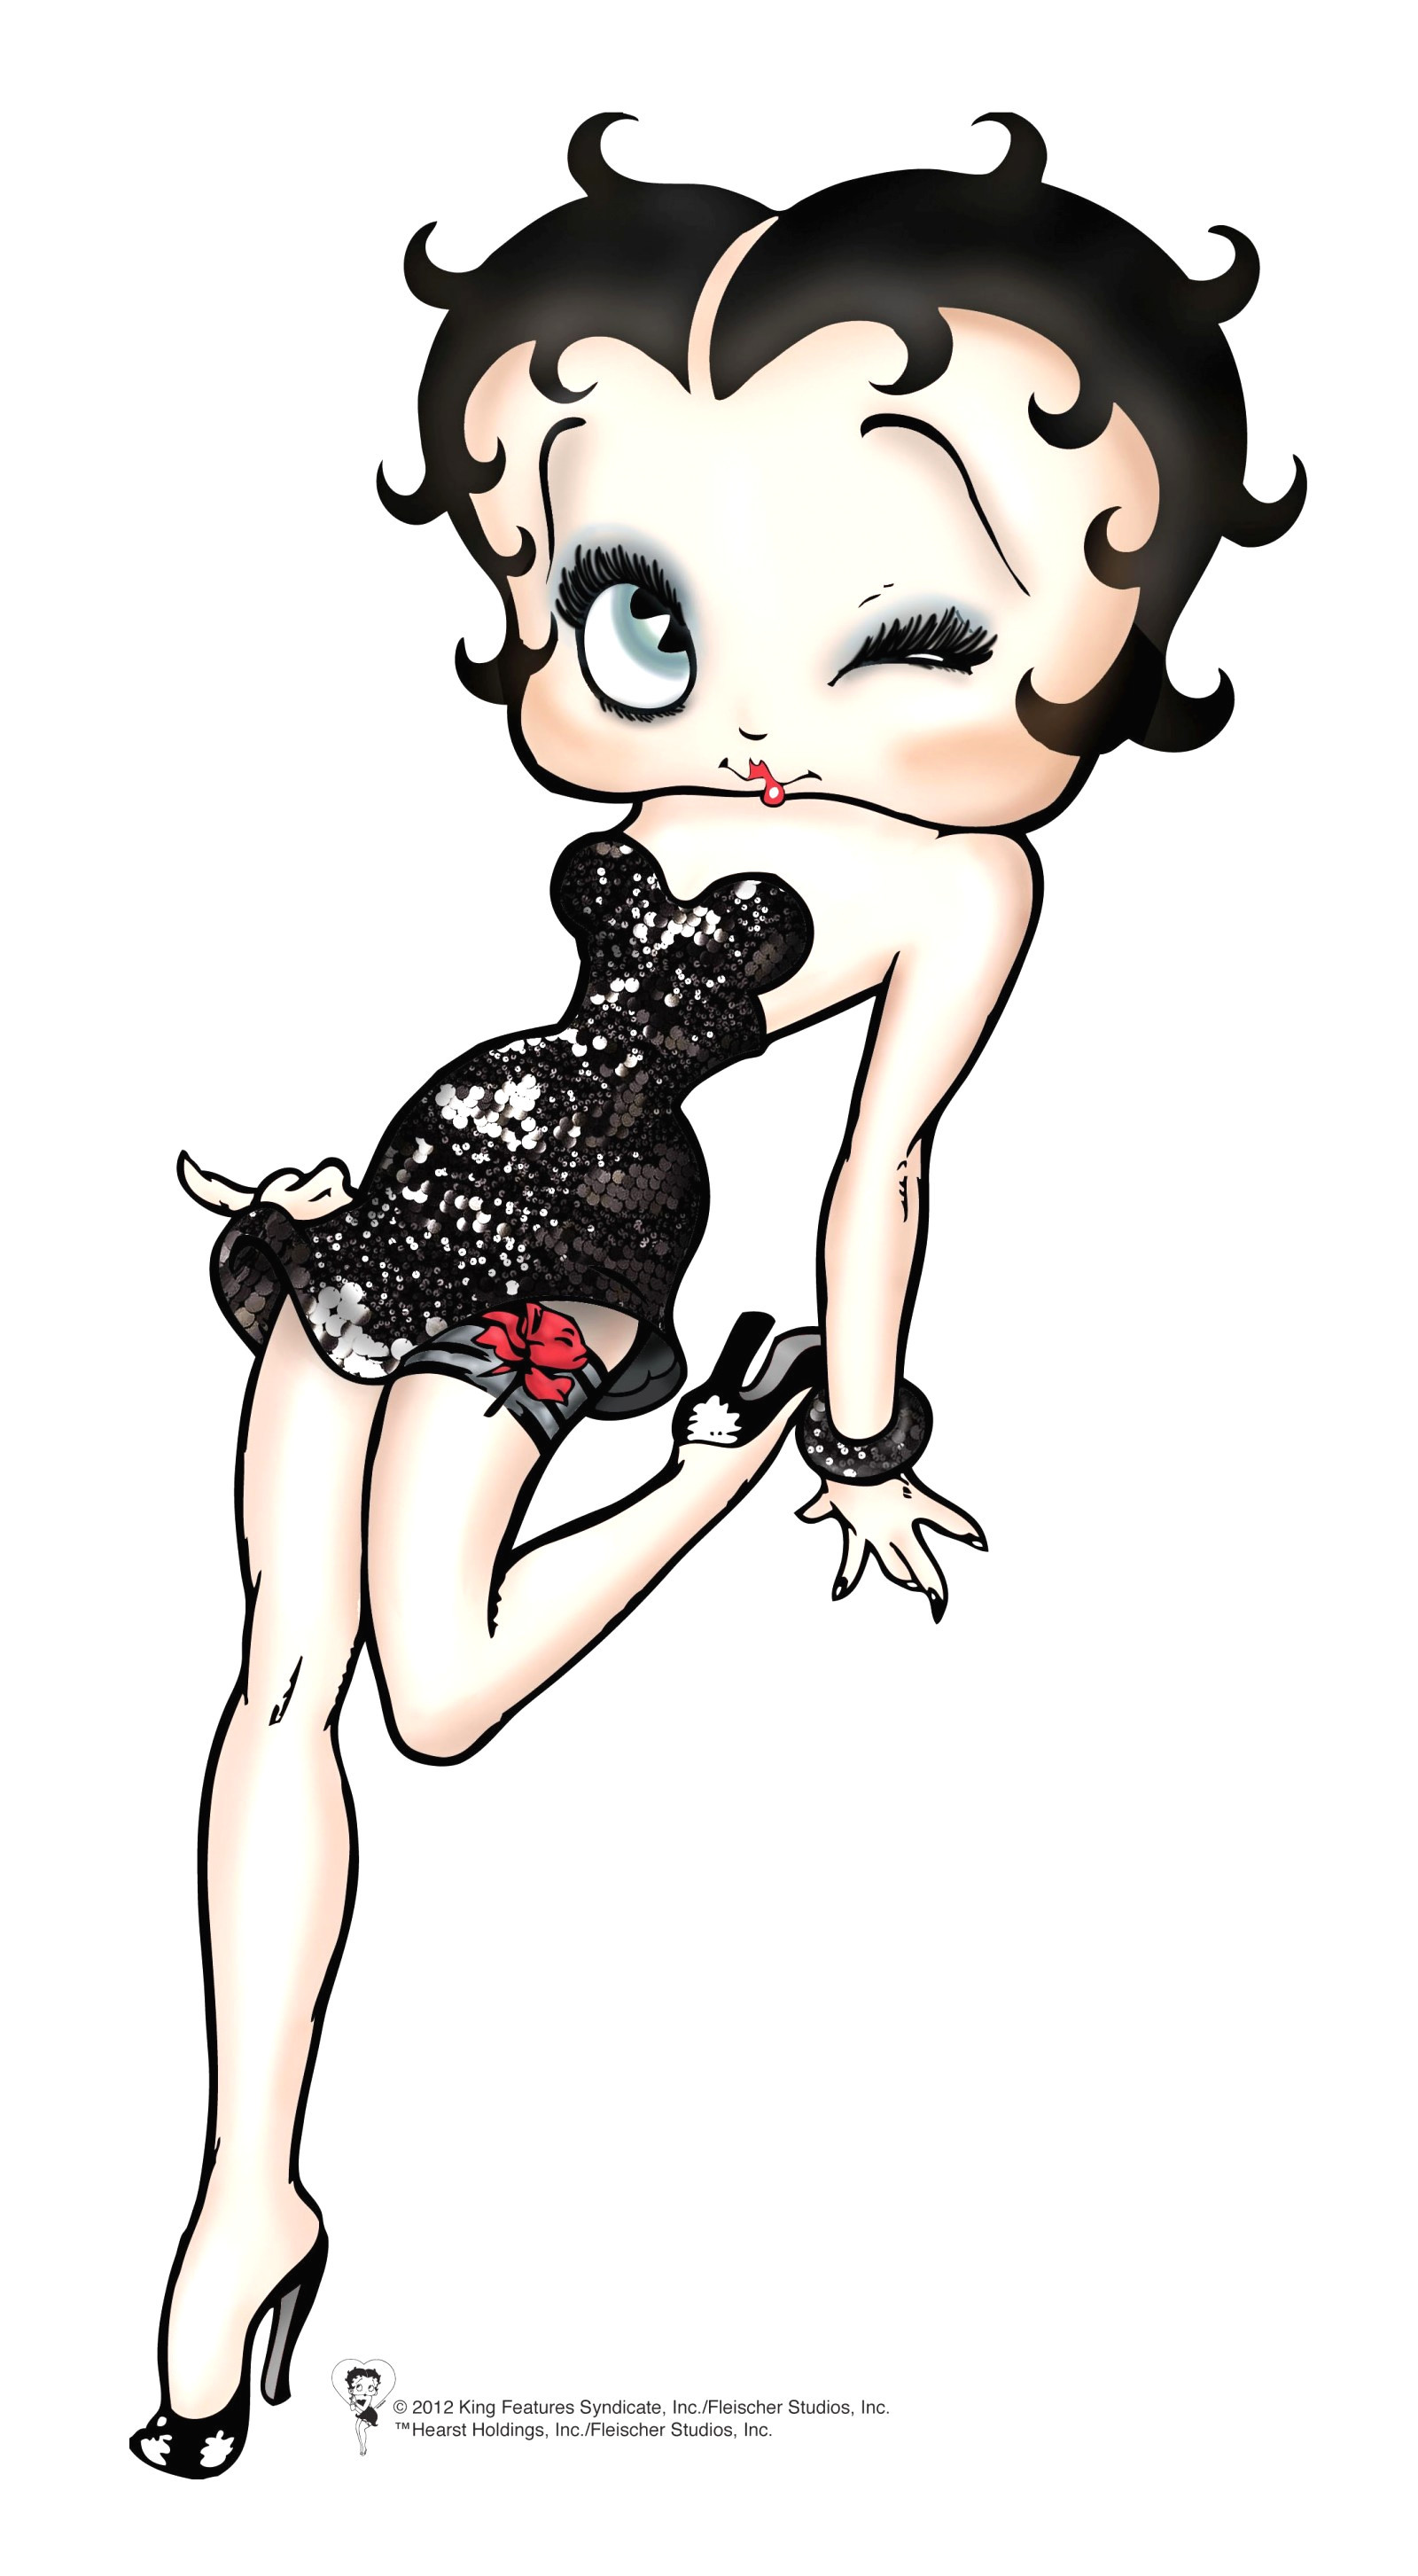 1600x2906 ... Free Betty Boop Wallpaper For Computer Fresh Free Desktop Wallpaper  Avec Free Betty Boop Wallpaper For ...